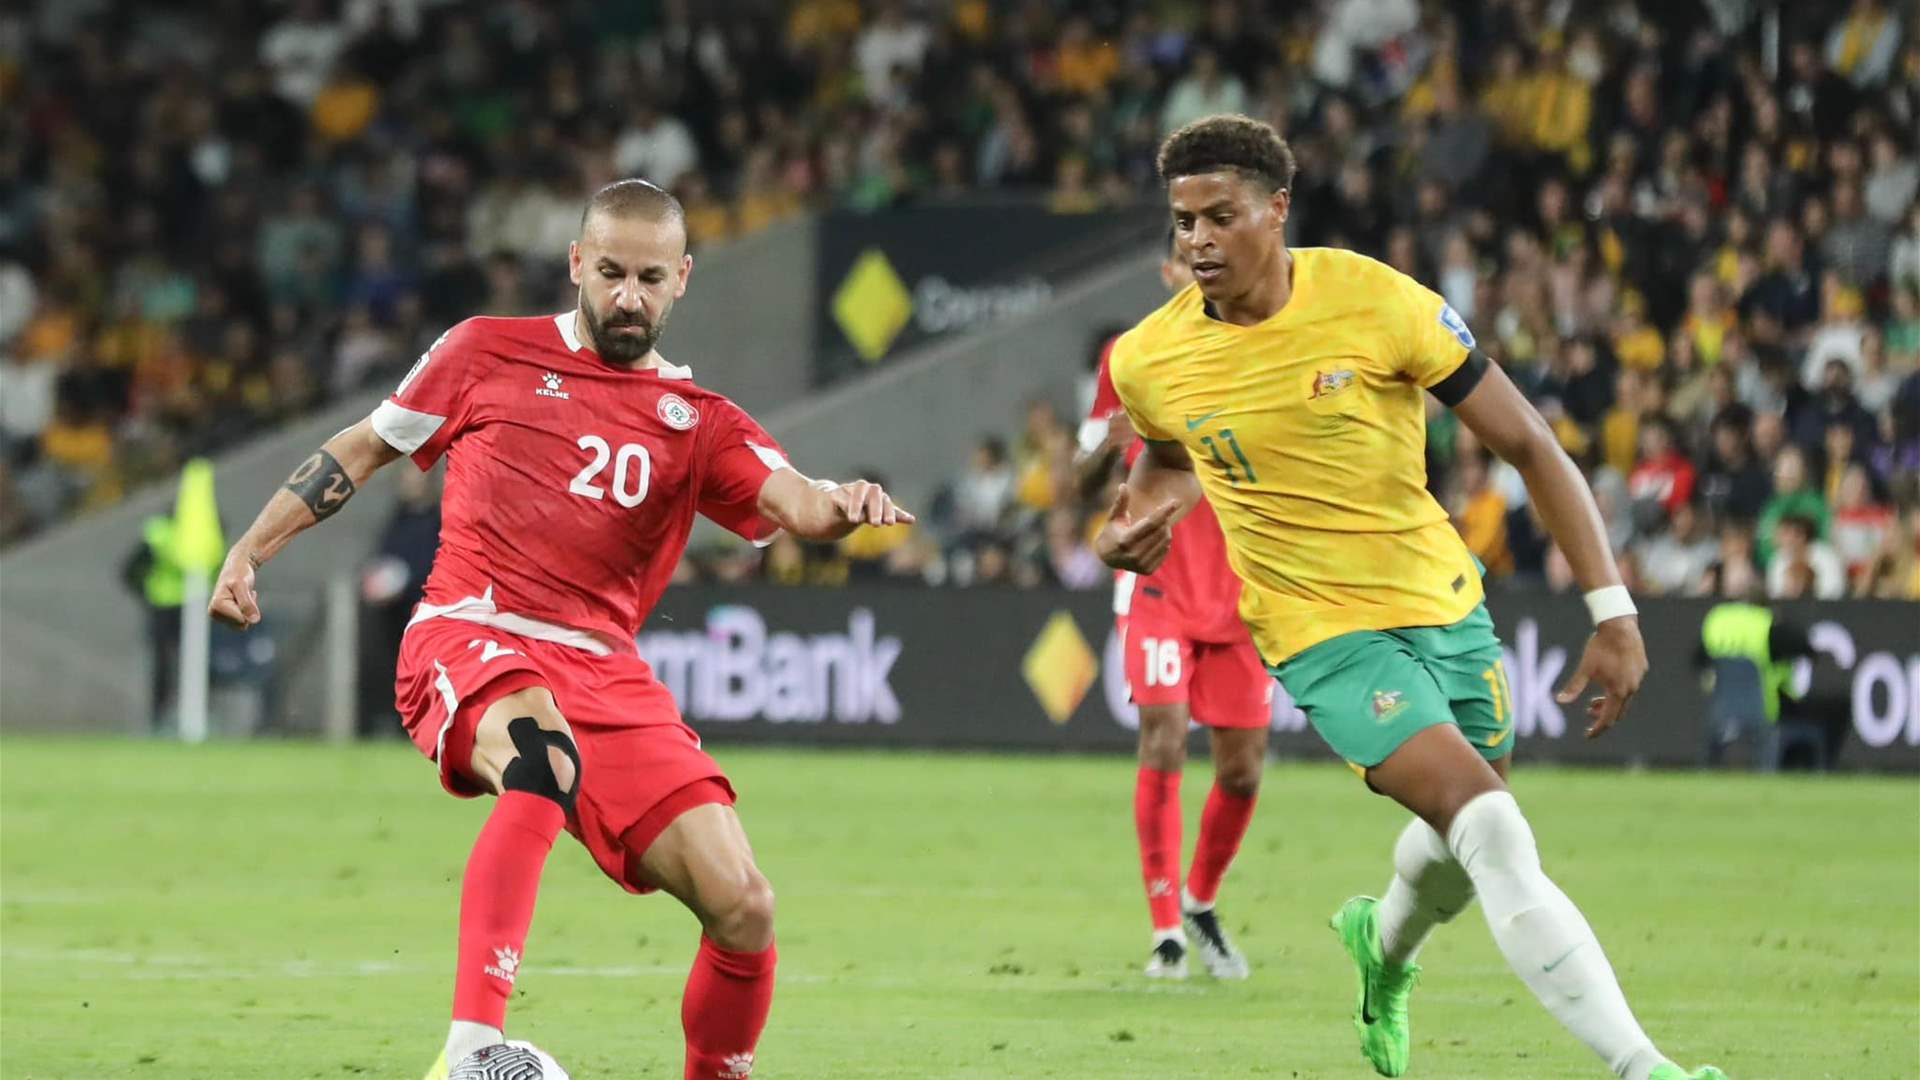 World Cup Asian qualifiers: Match between Lebanon and Australia ends with a 2-0 victory for the host, Australia